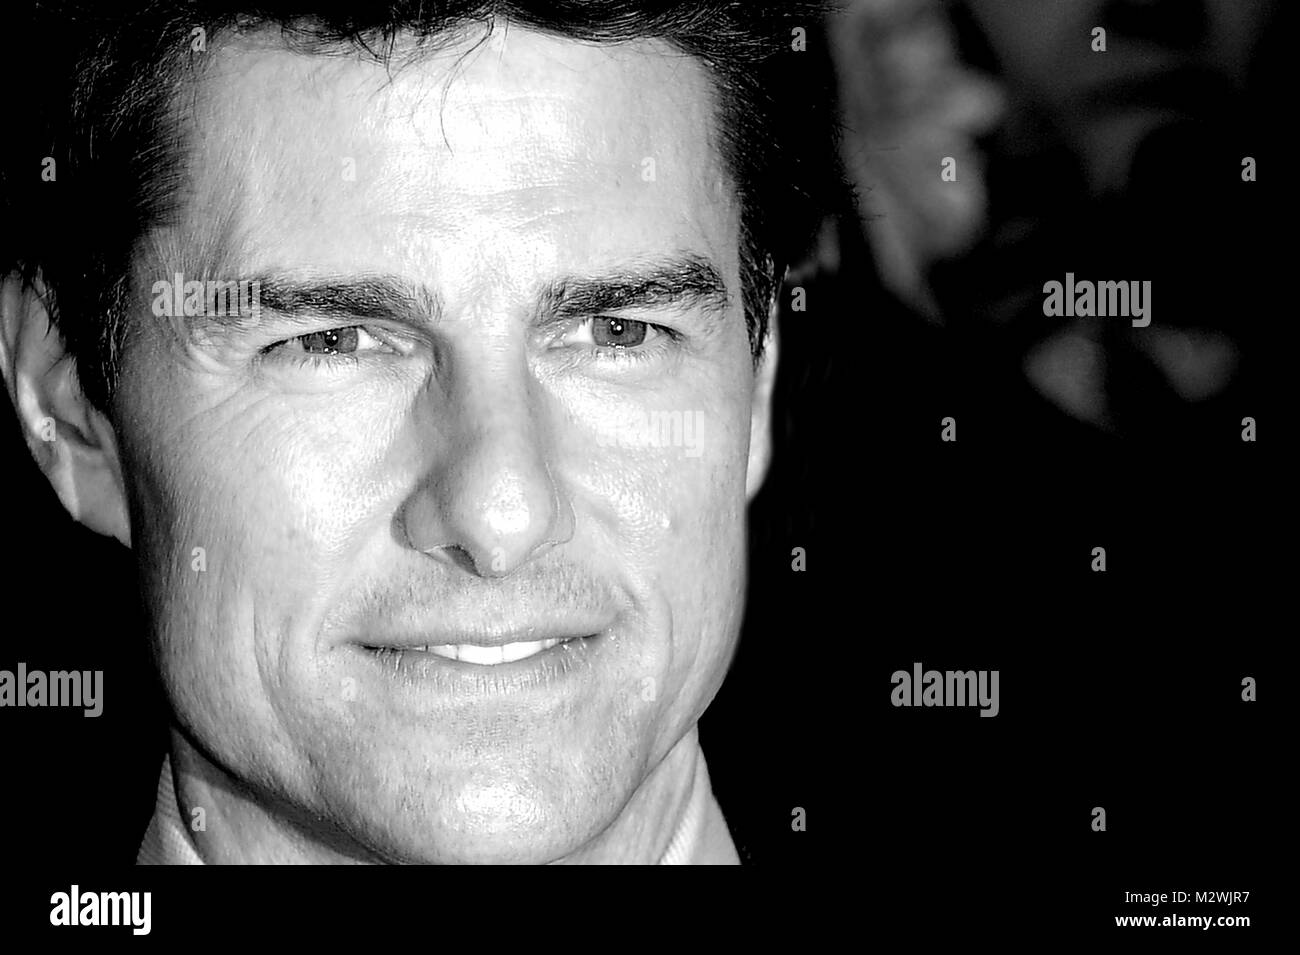 American actor Tom Cruise attends the UK premiere of Oblivion at BFI IMax in London. 4th April 2013 © Paul Treadway Stock Photo